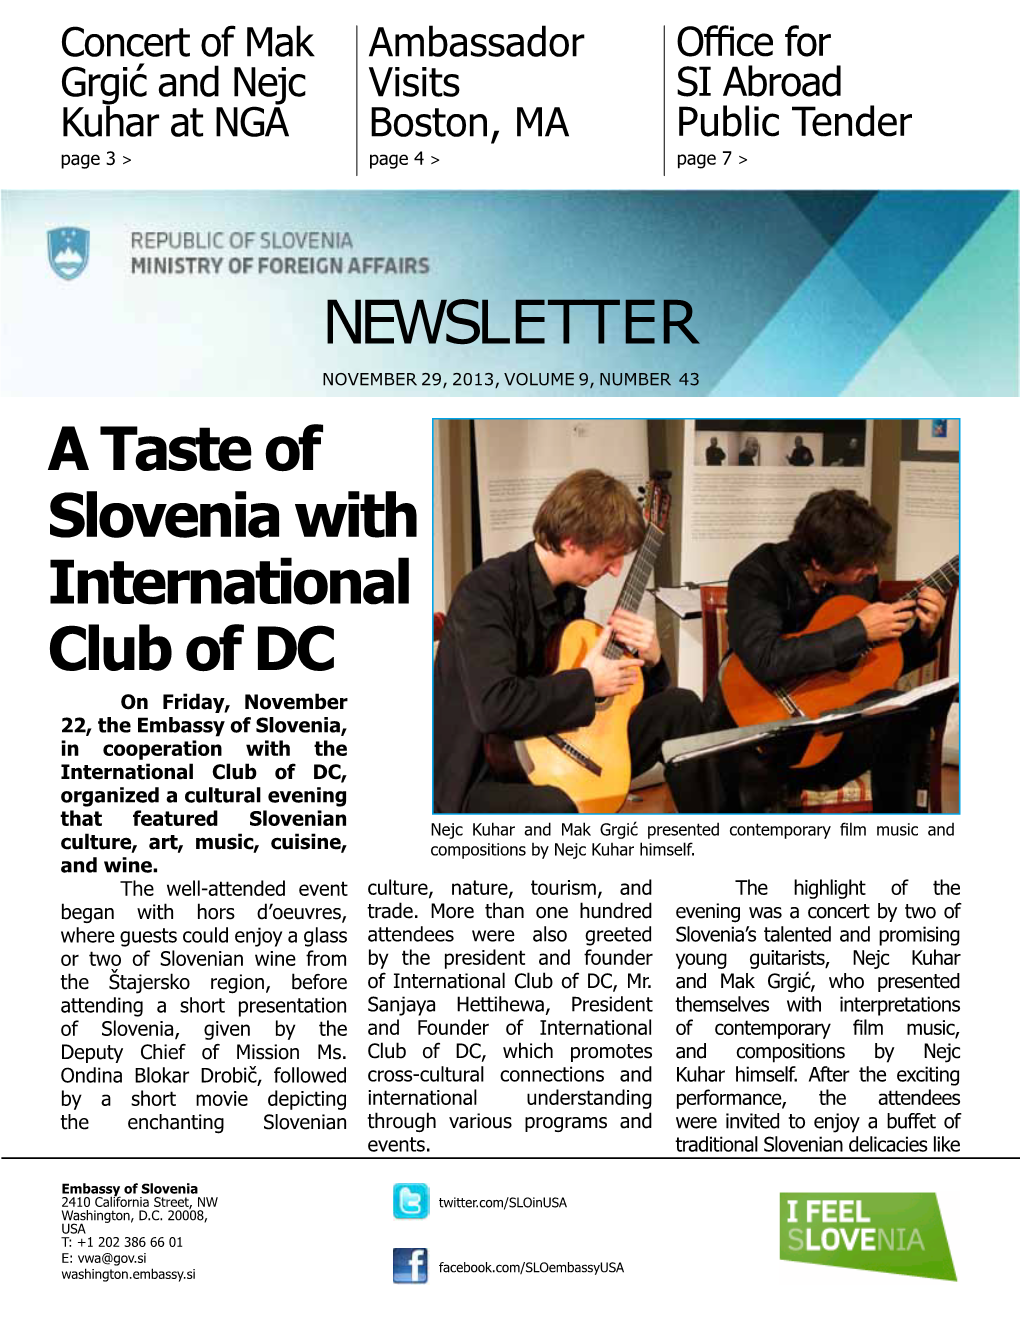 NEWSLETTER a Taste of Slovenia with International Club of DC